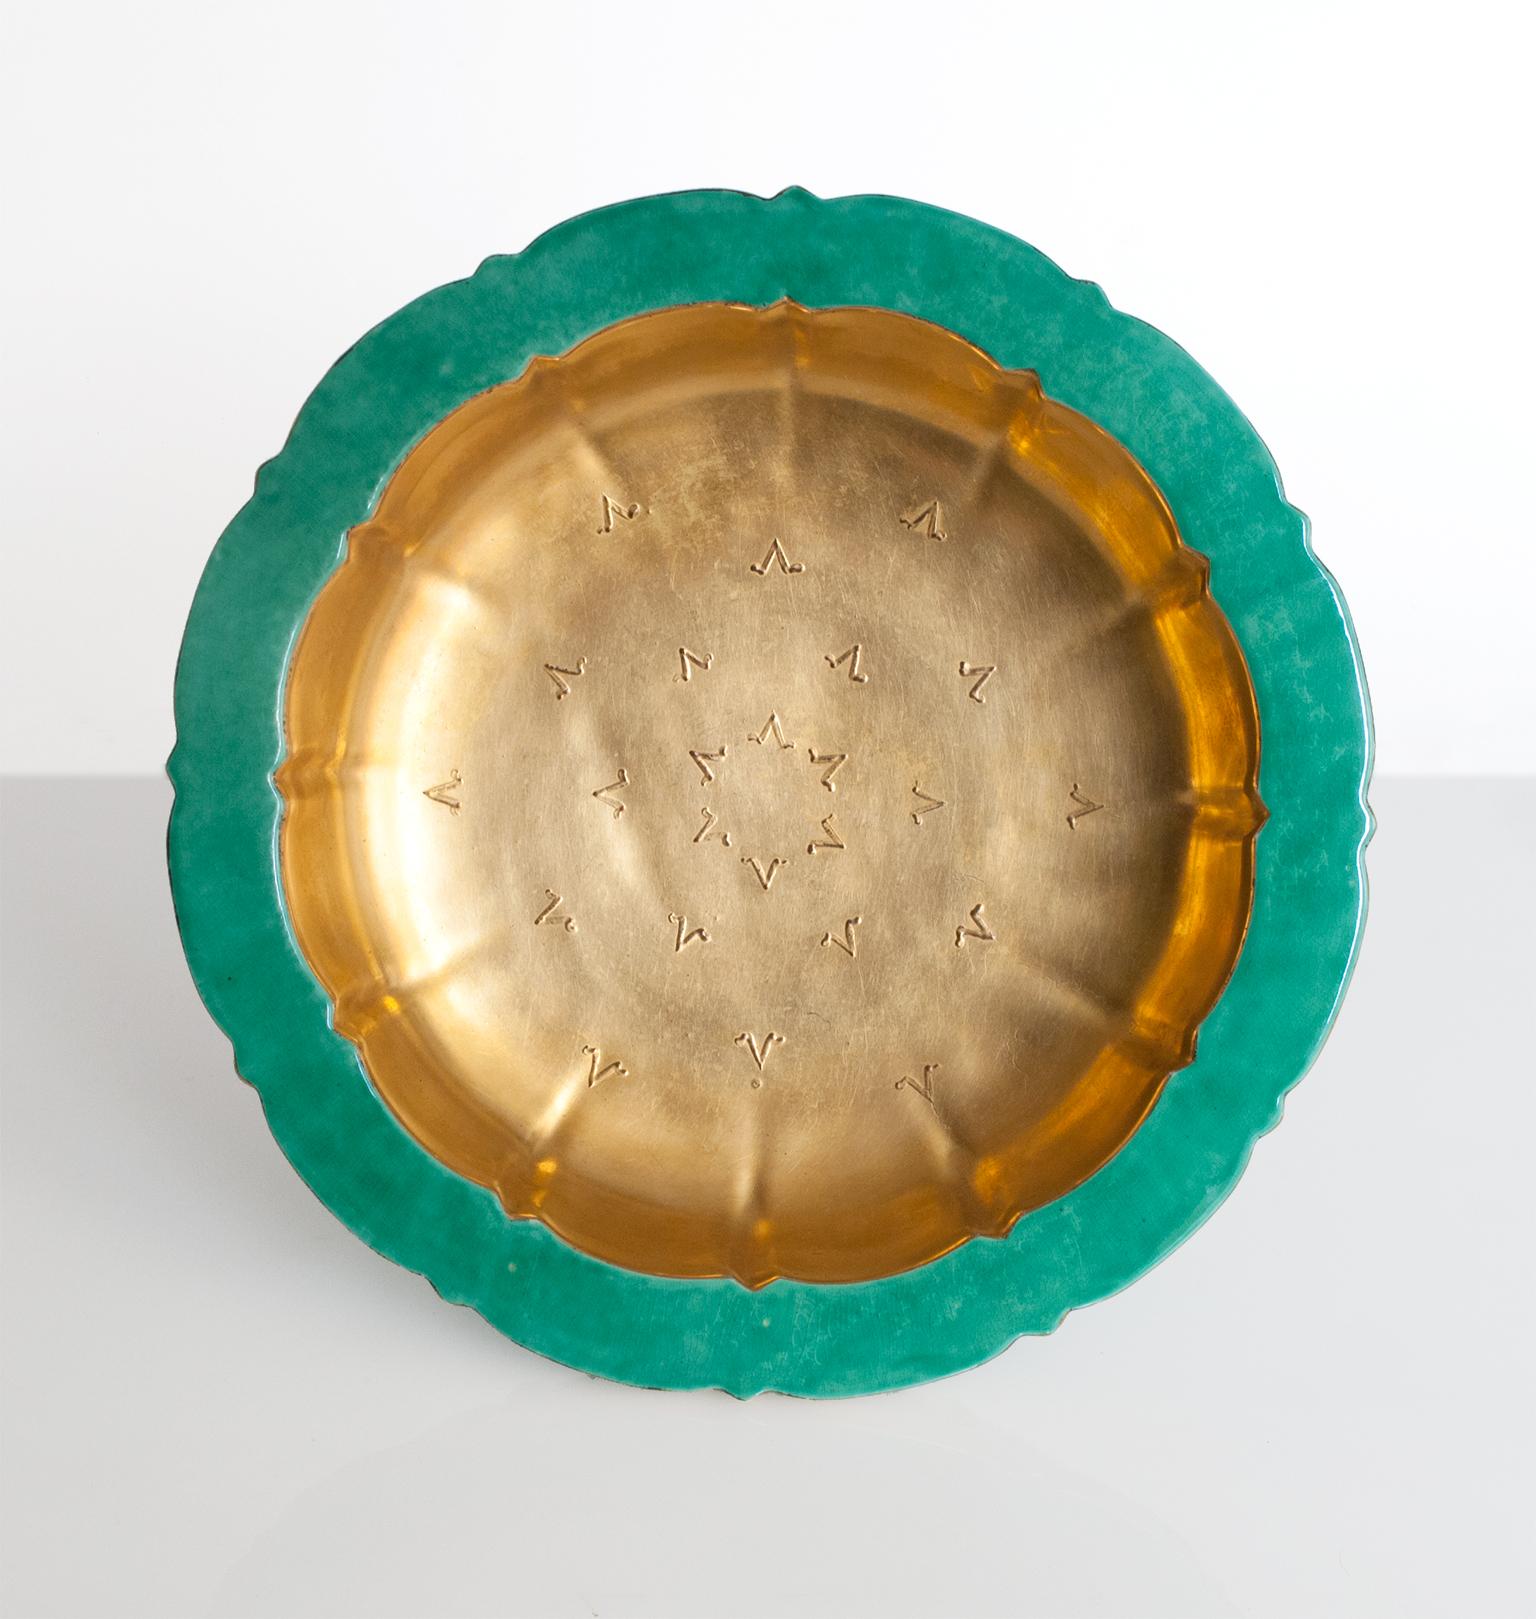 Large Scandinavian Modern ceramic bowl glazed in gold and green glazes. Designed by Wilhelm Kage for Gustavsberg, circa 1920s. Measure: Height 3